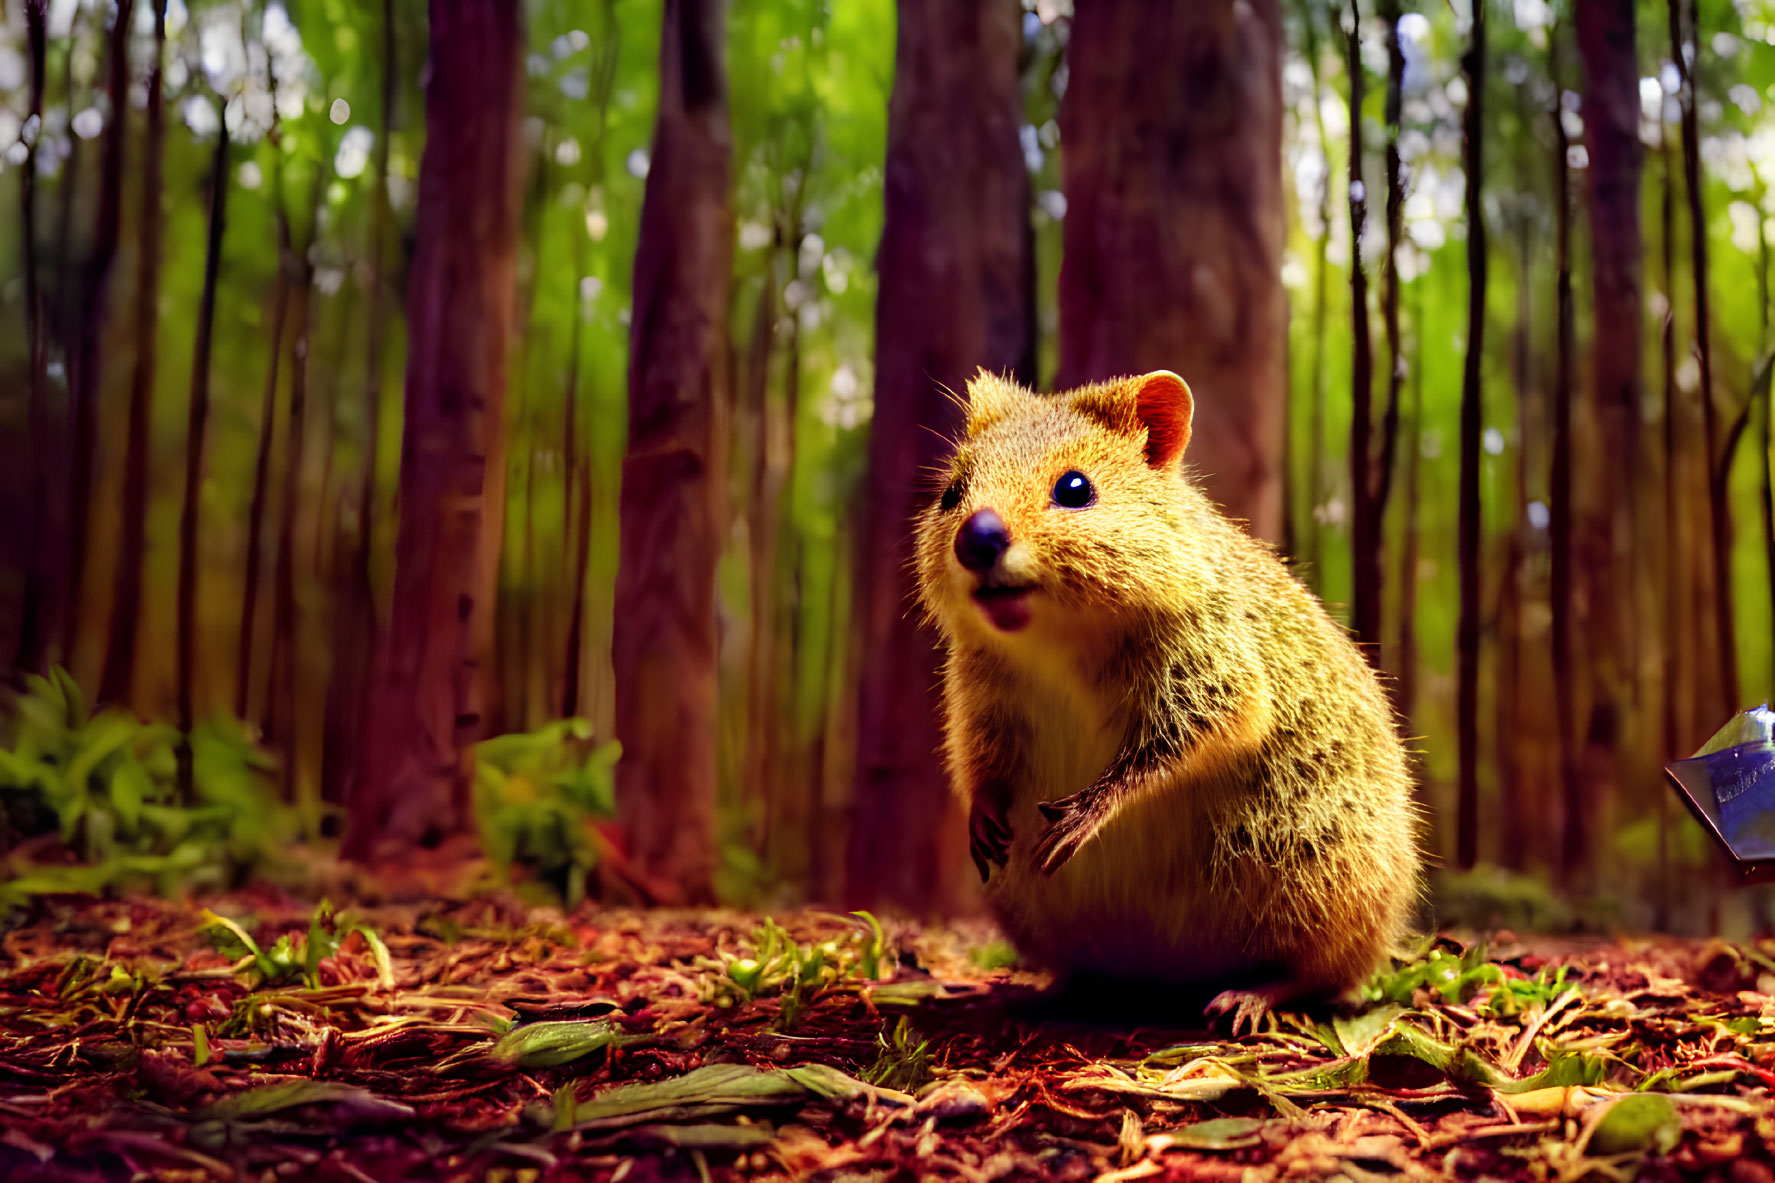 Quokka in Forest Setting with Vibrant Foliage